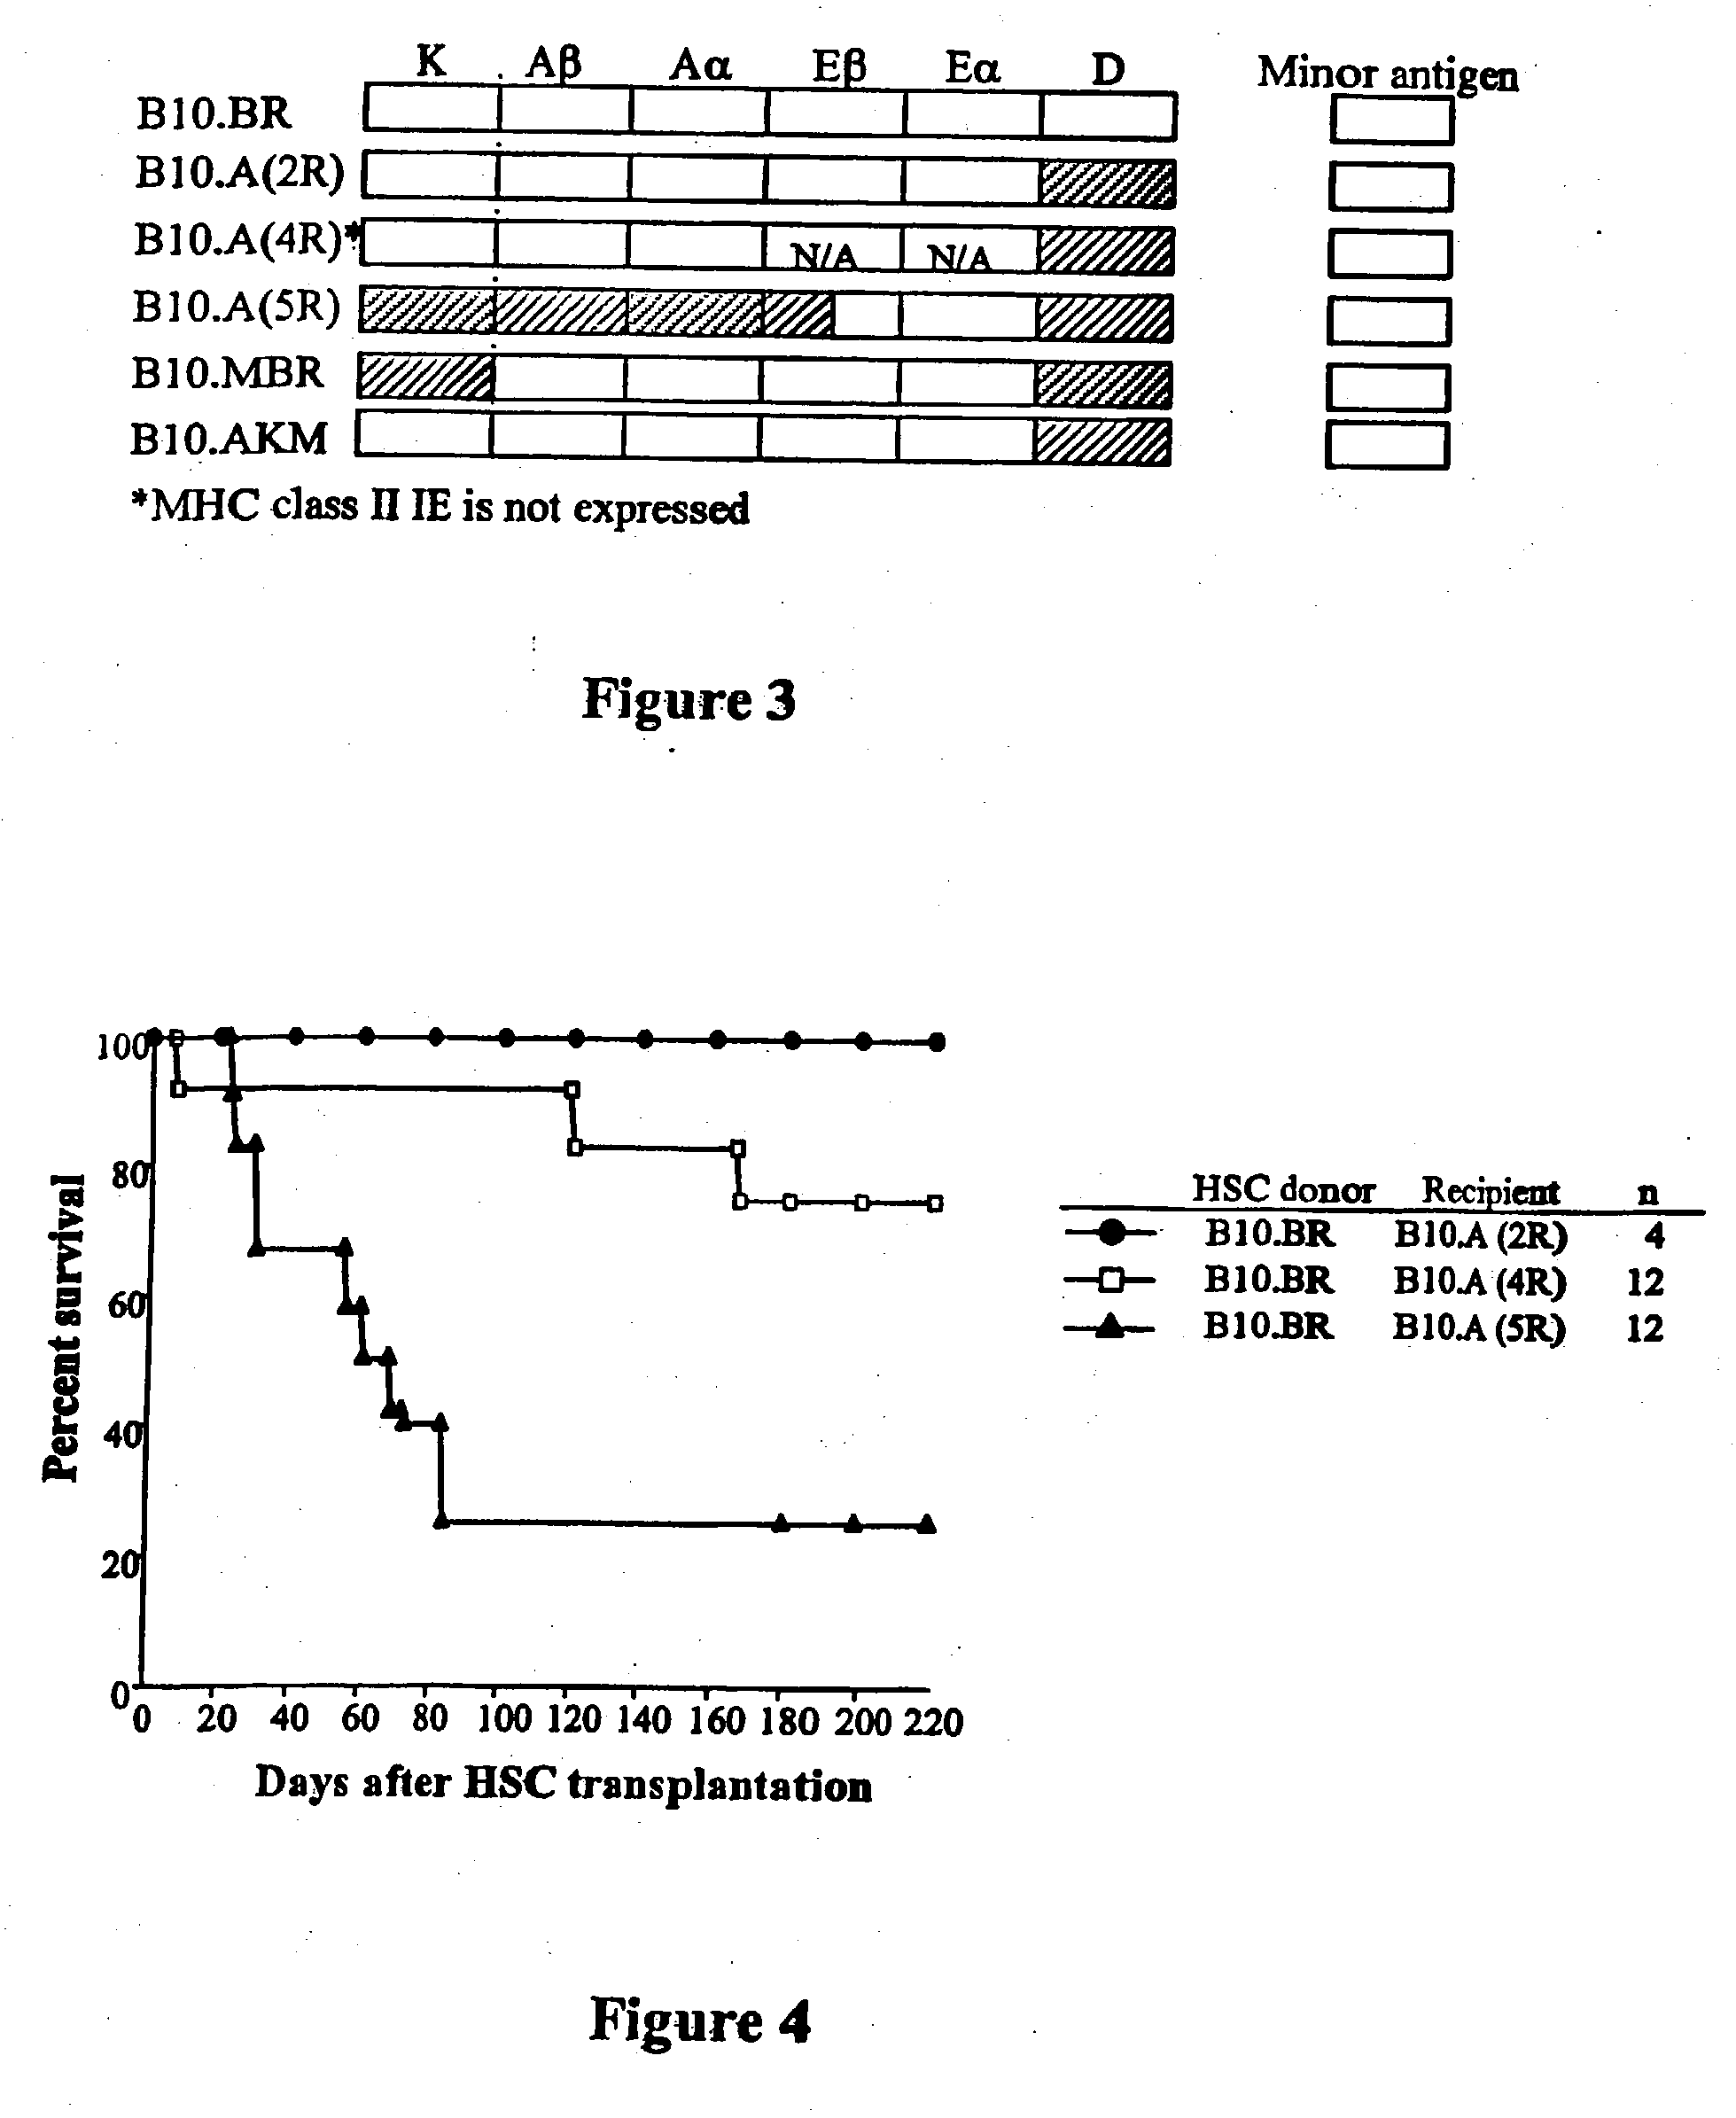 Methods for enhancing engraftment of purified hematopoietic stem cells in allogeneic recipients